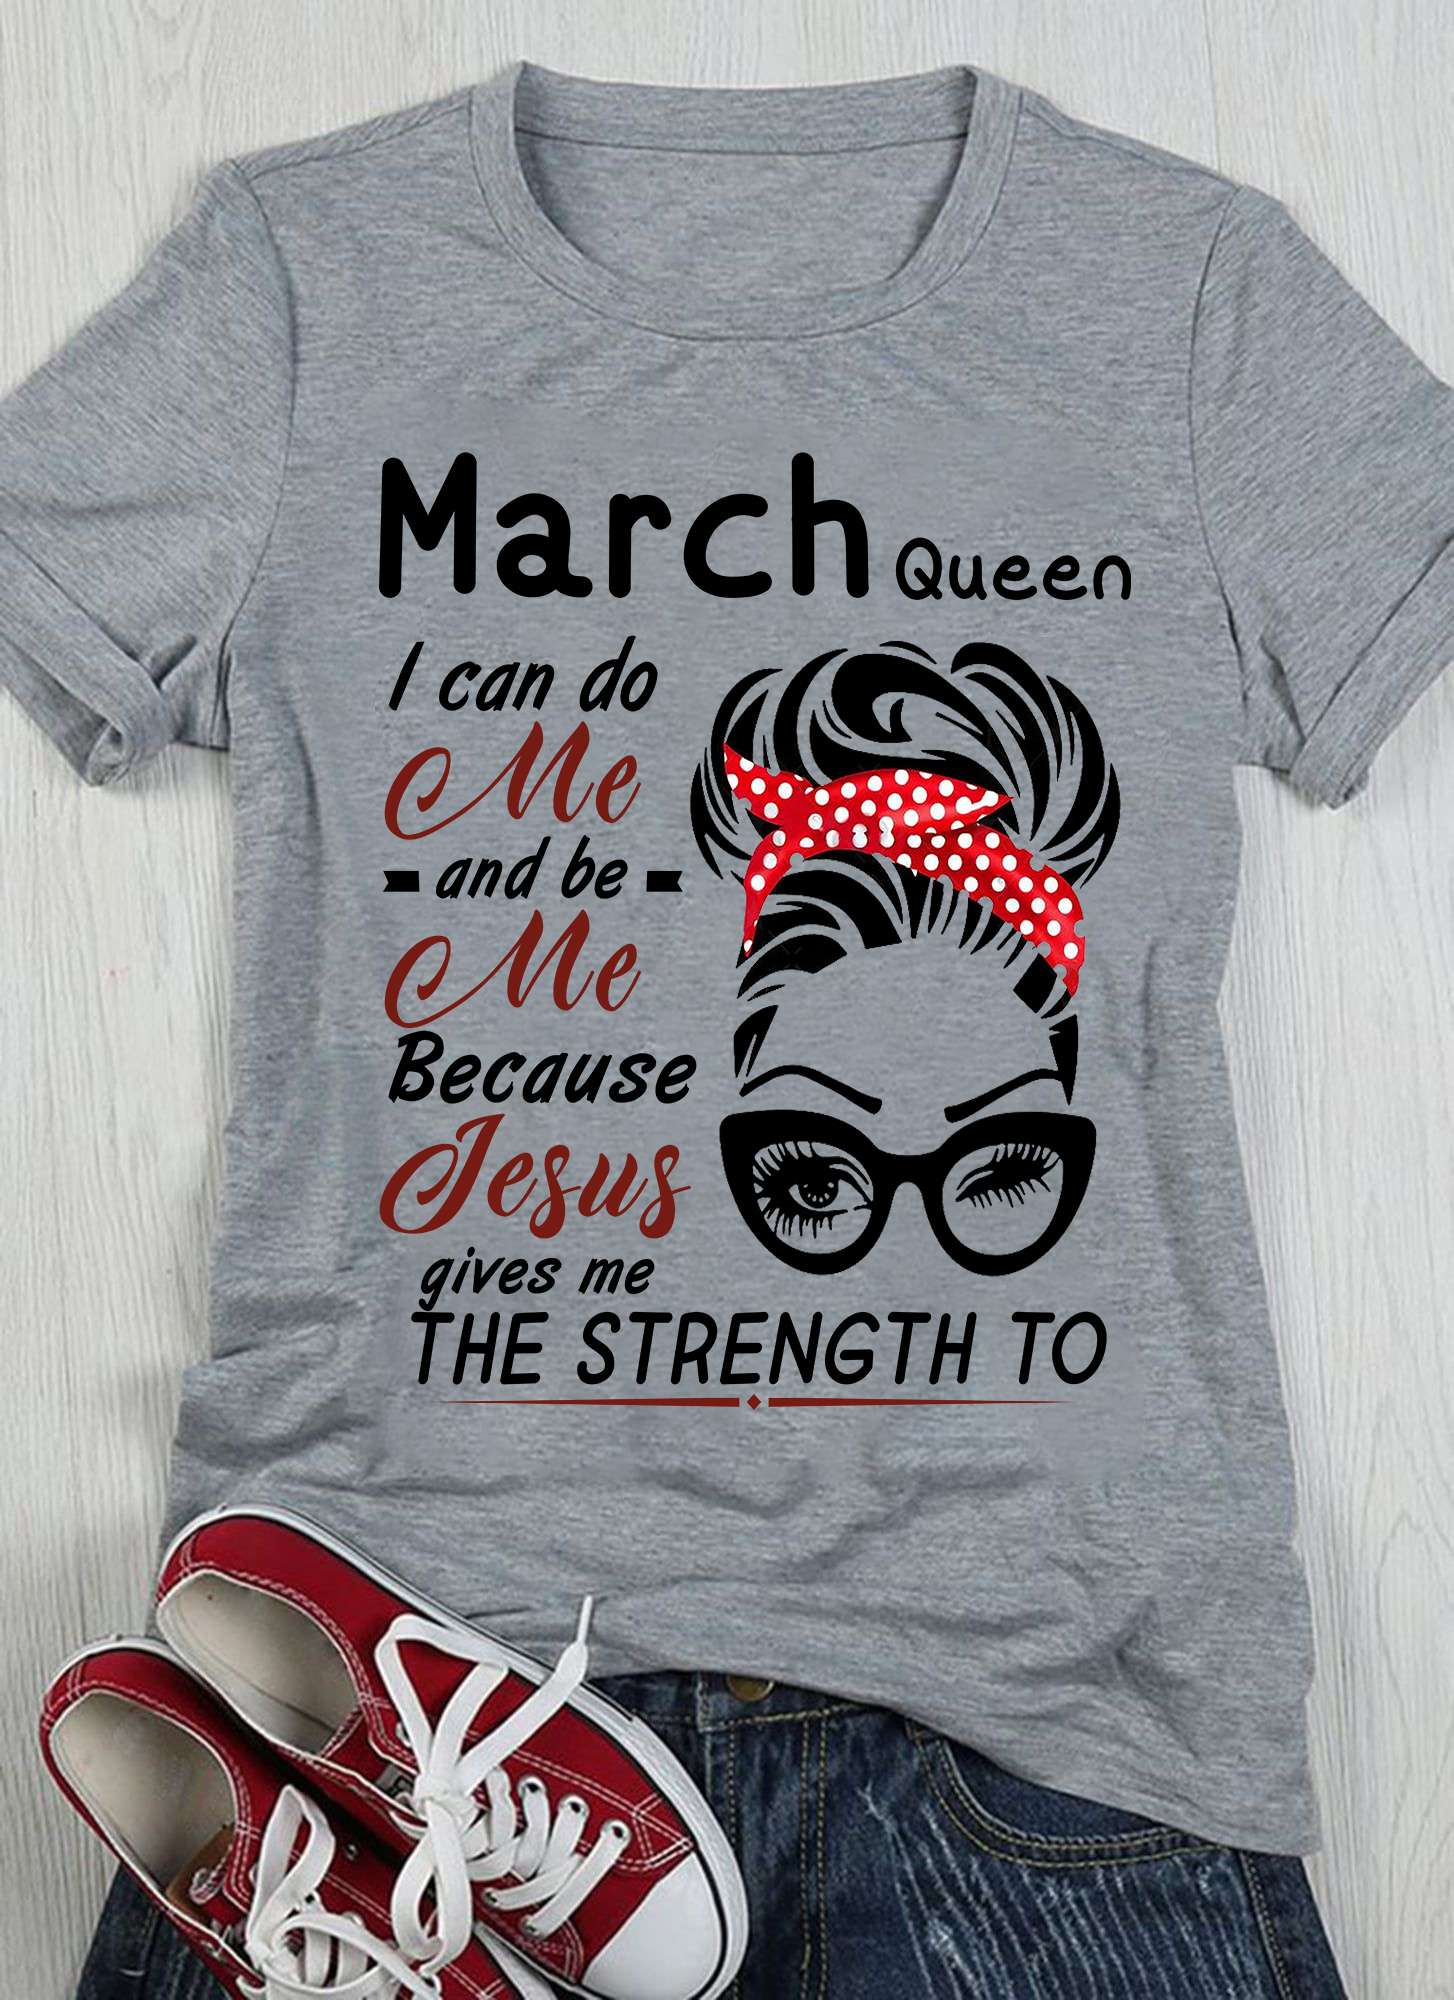 March queen I can do me and be me because Jesus gives me the strength to - Jesus the god